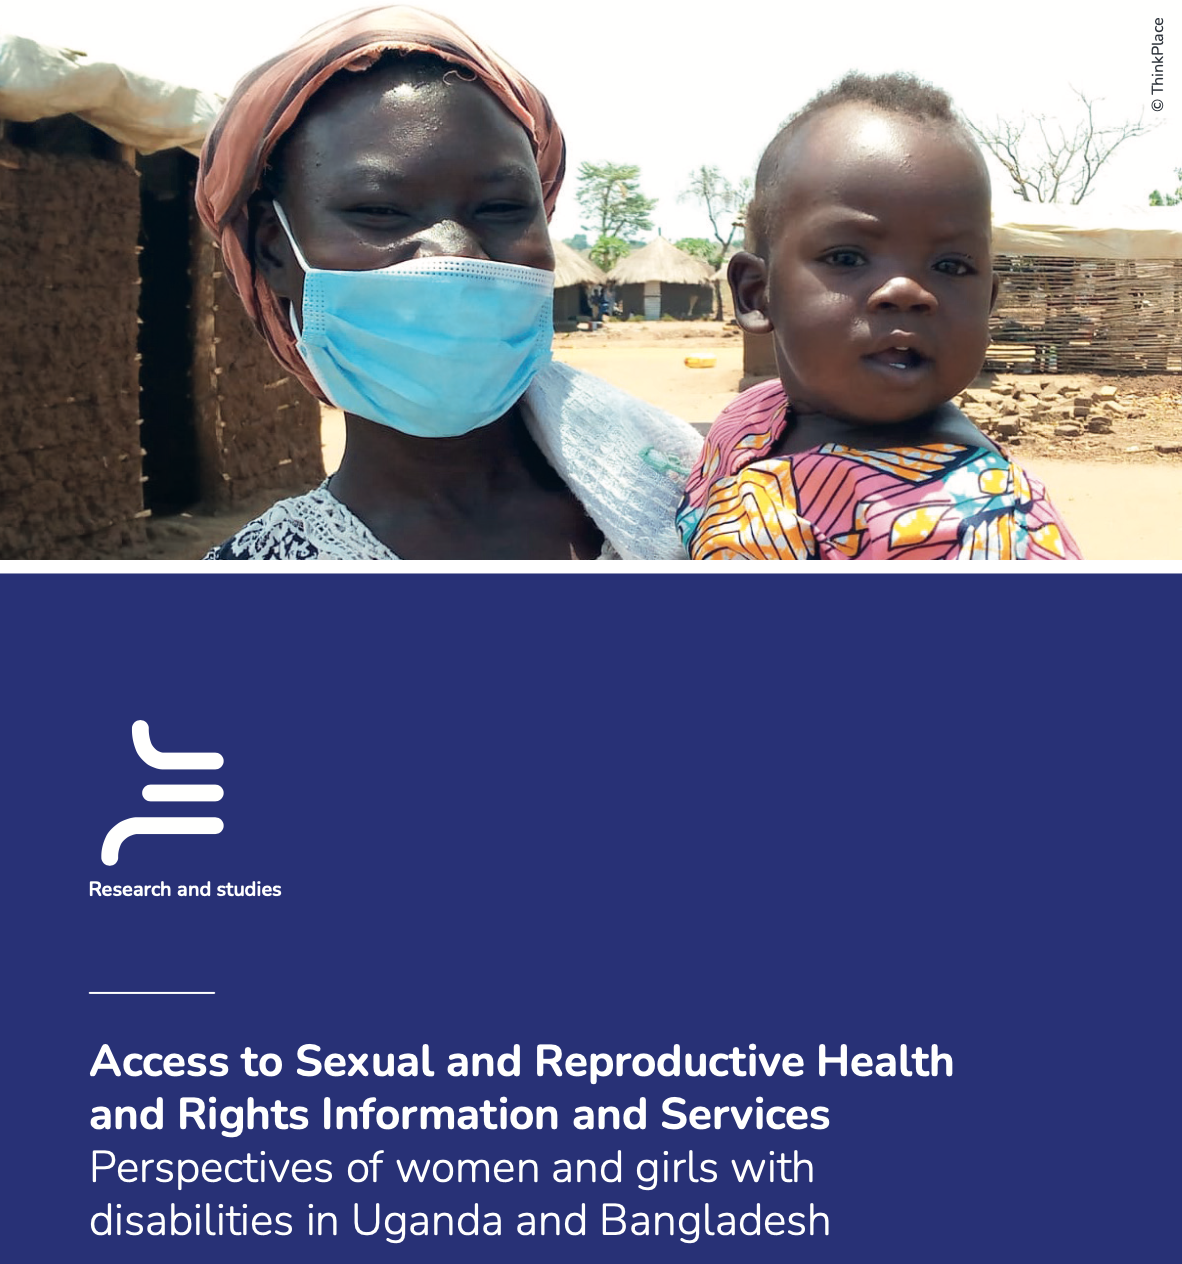 Access to SRHR Information and Services: Perspectives of women and girls with disabilities in Uganda and Bangladesh